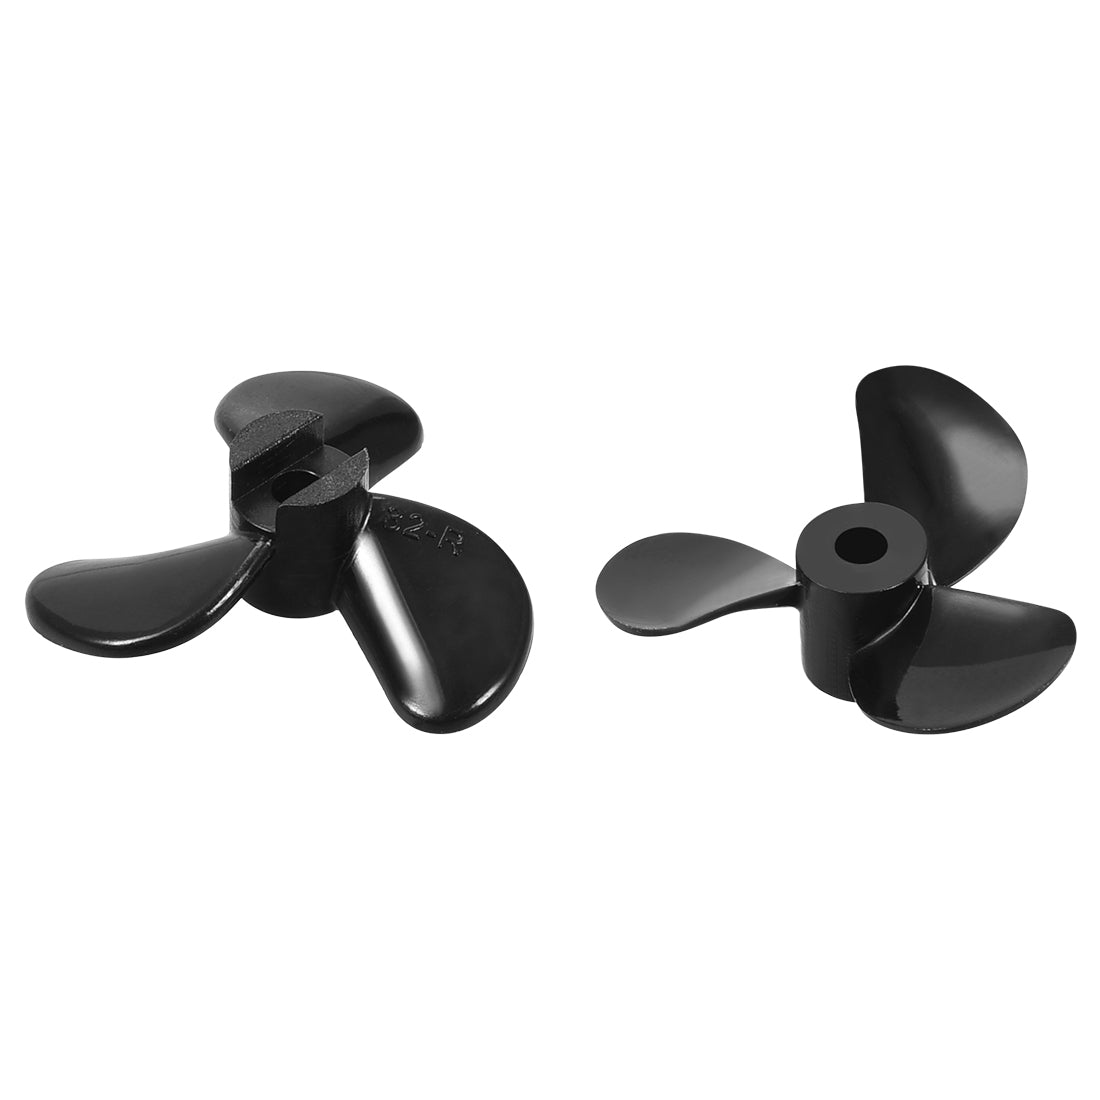 uxcell Uxcell RC Boat CCW Propeller 4mm Shaft 3 Vanes 28mm 1.4 P Fan Shape Pastic Black Rotating Propeller Props for RC Boat 2pcs